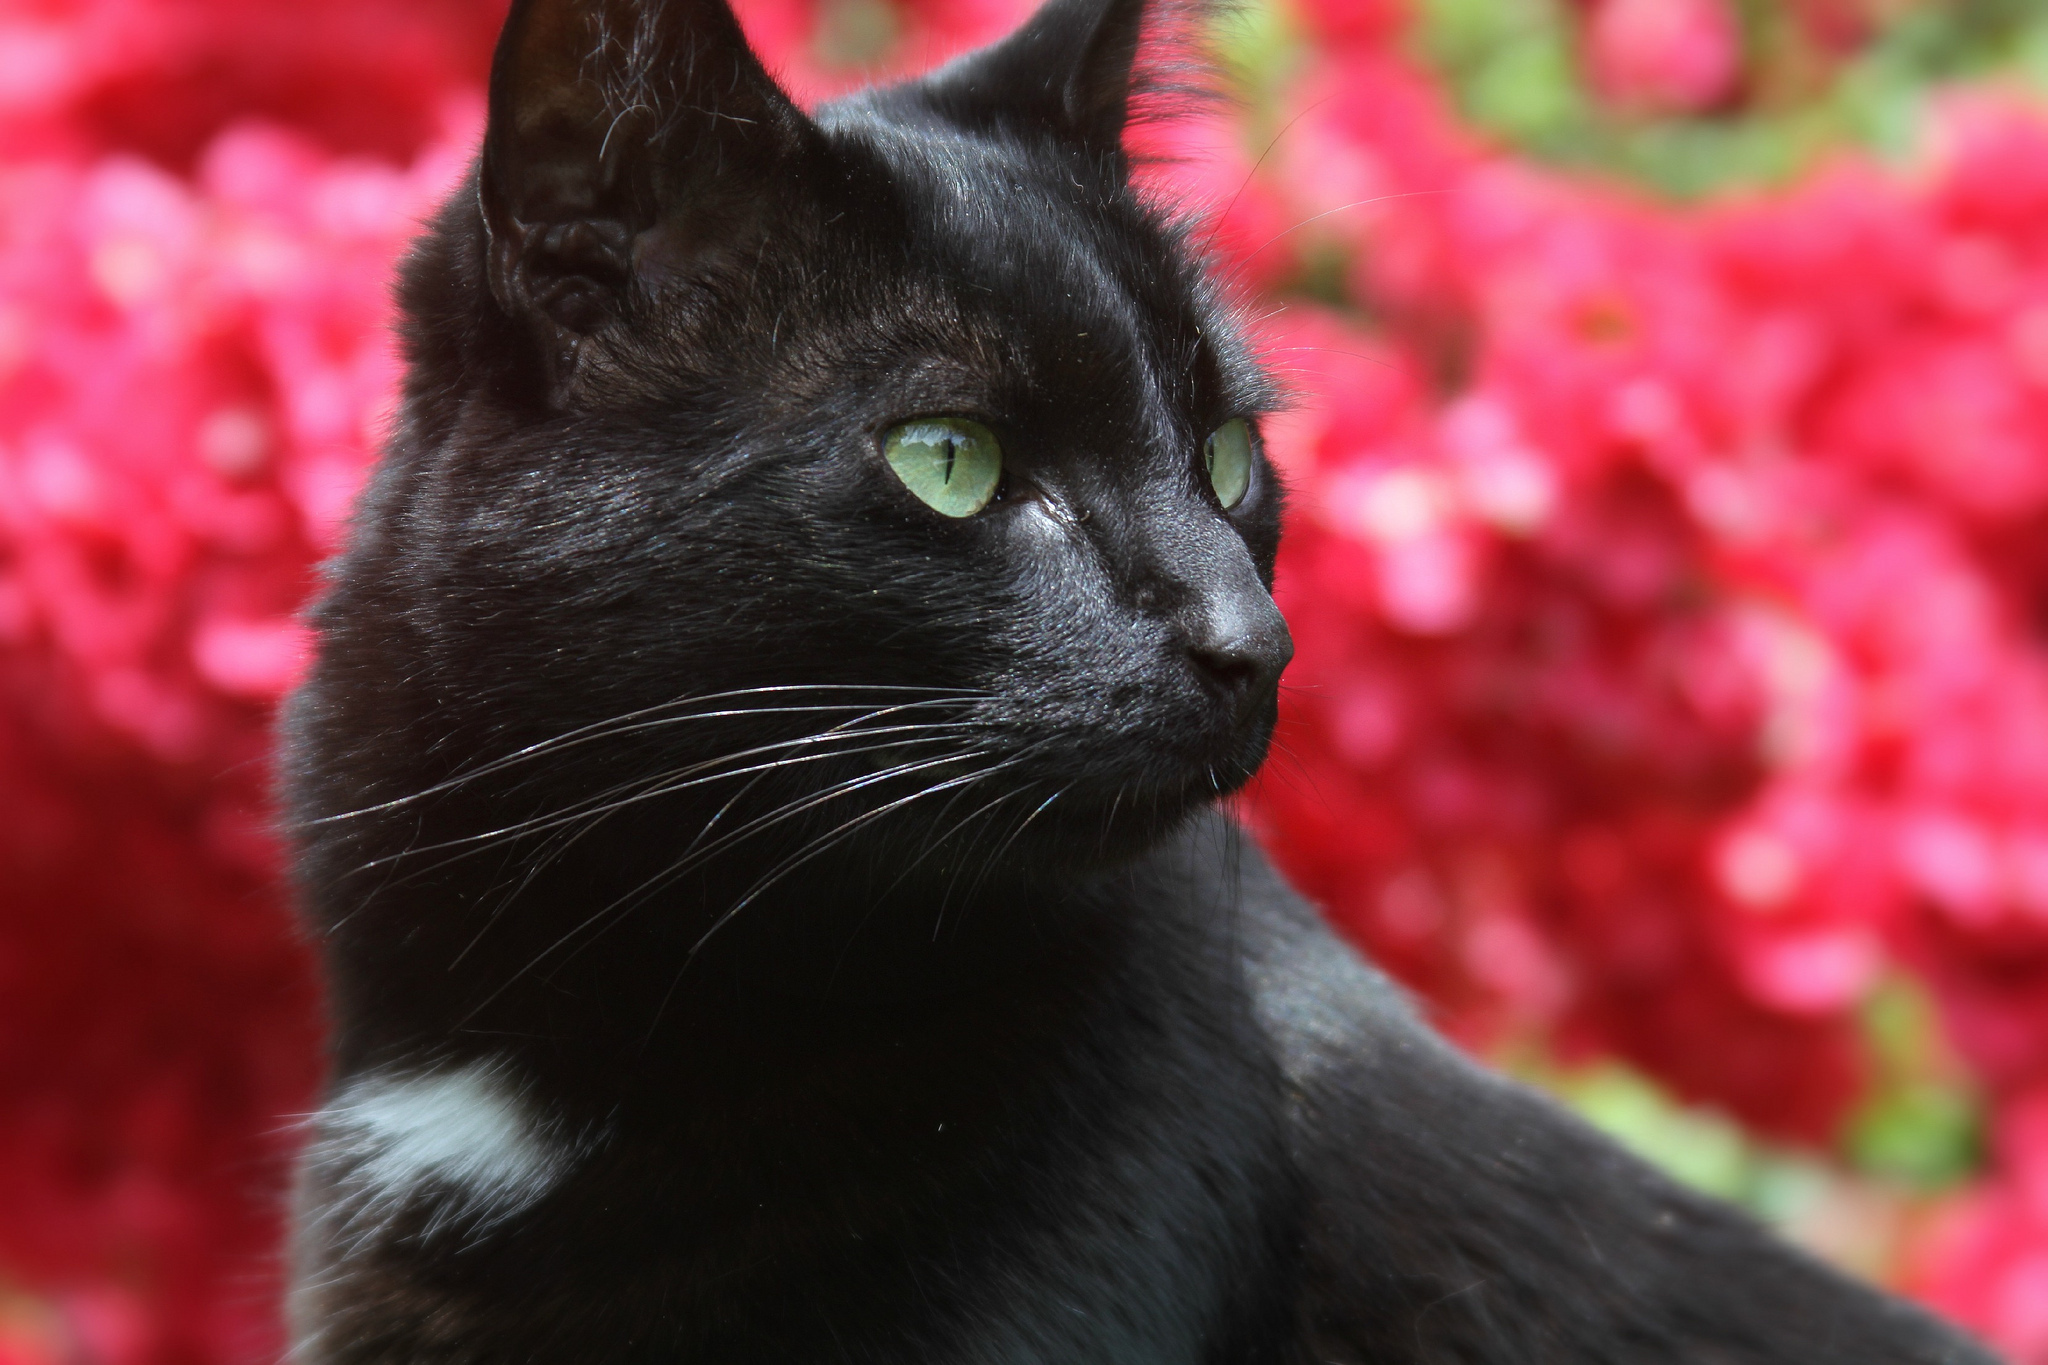 Black cat on a background of pink flowers wallpapers and images